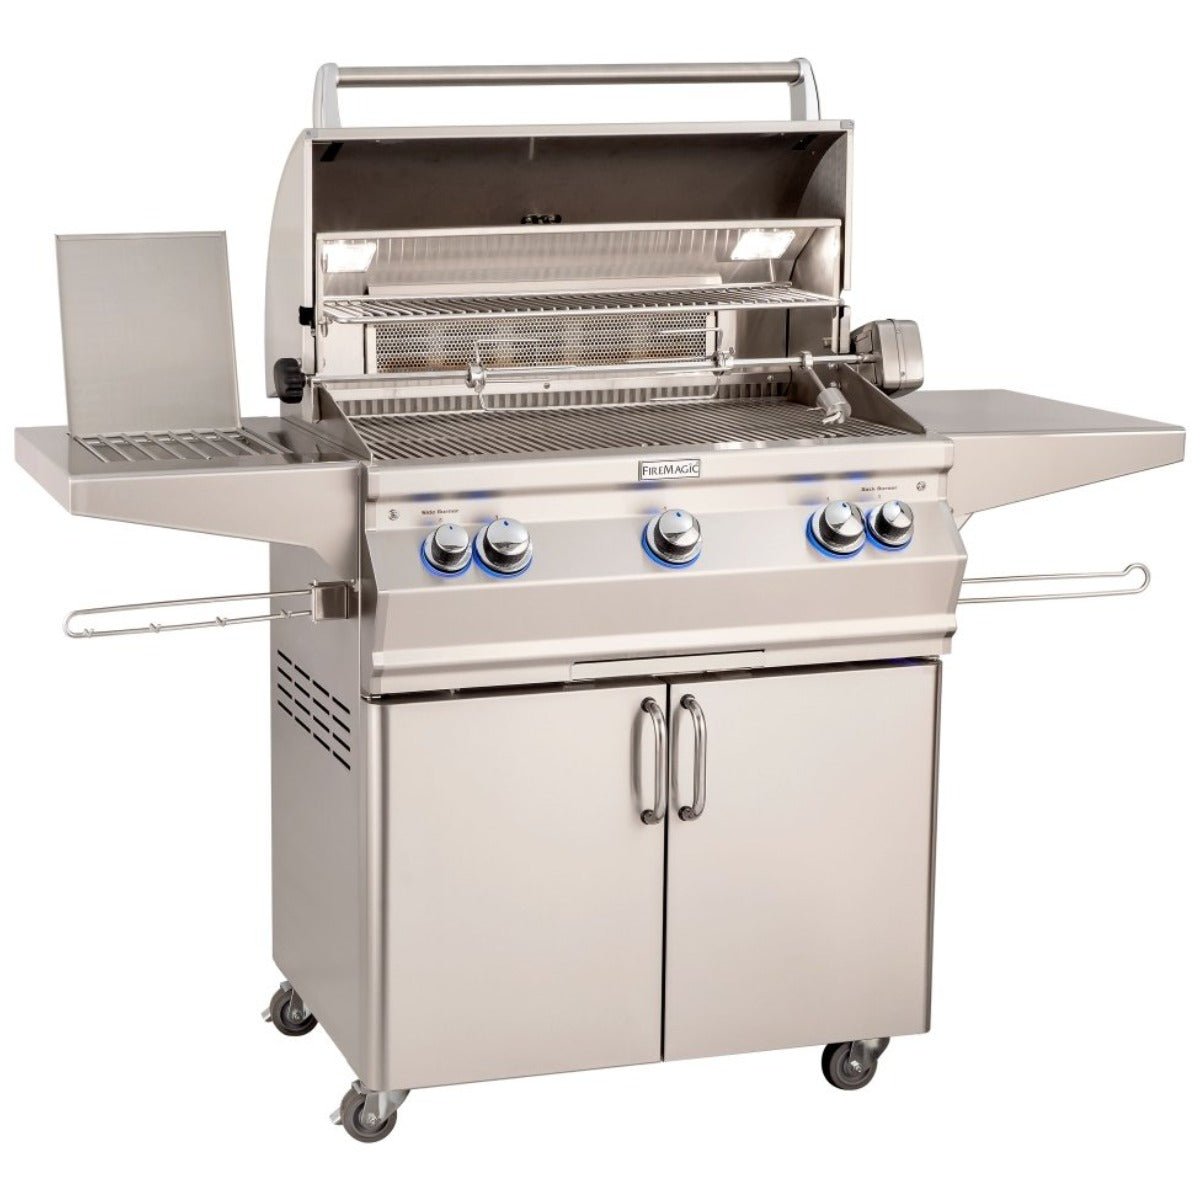 Fire Magic Grills Aurora A660s Portable Grill with Rotisserie Kit & Side Burner. High-quality outdoor grilling - Outdoorium